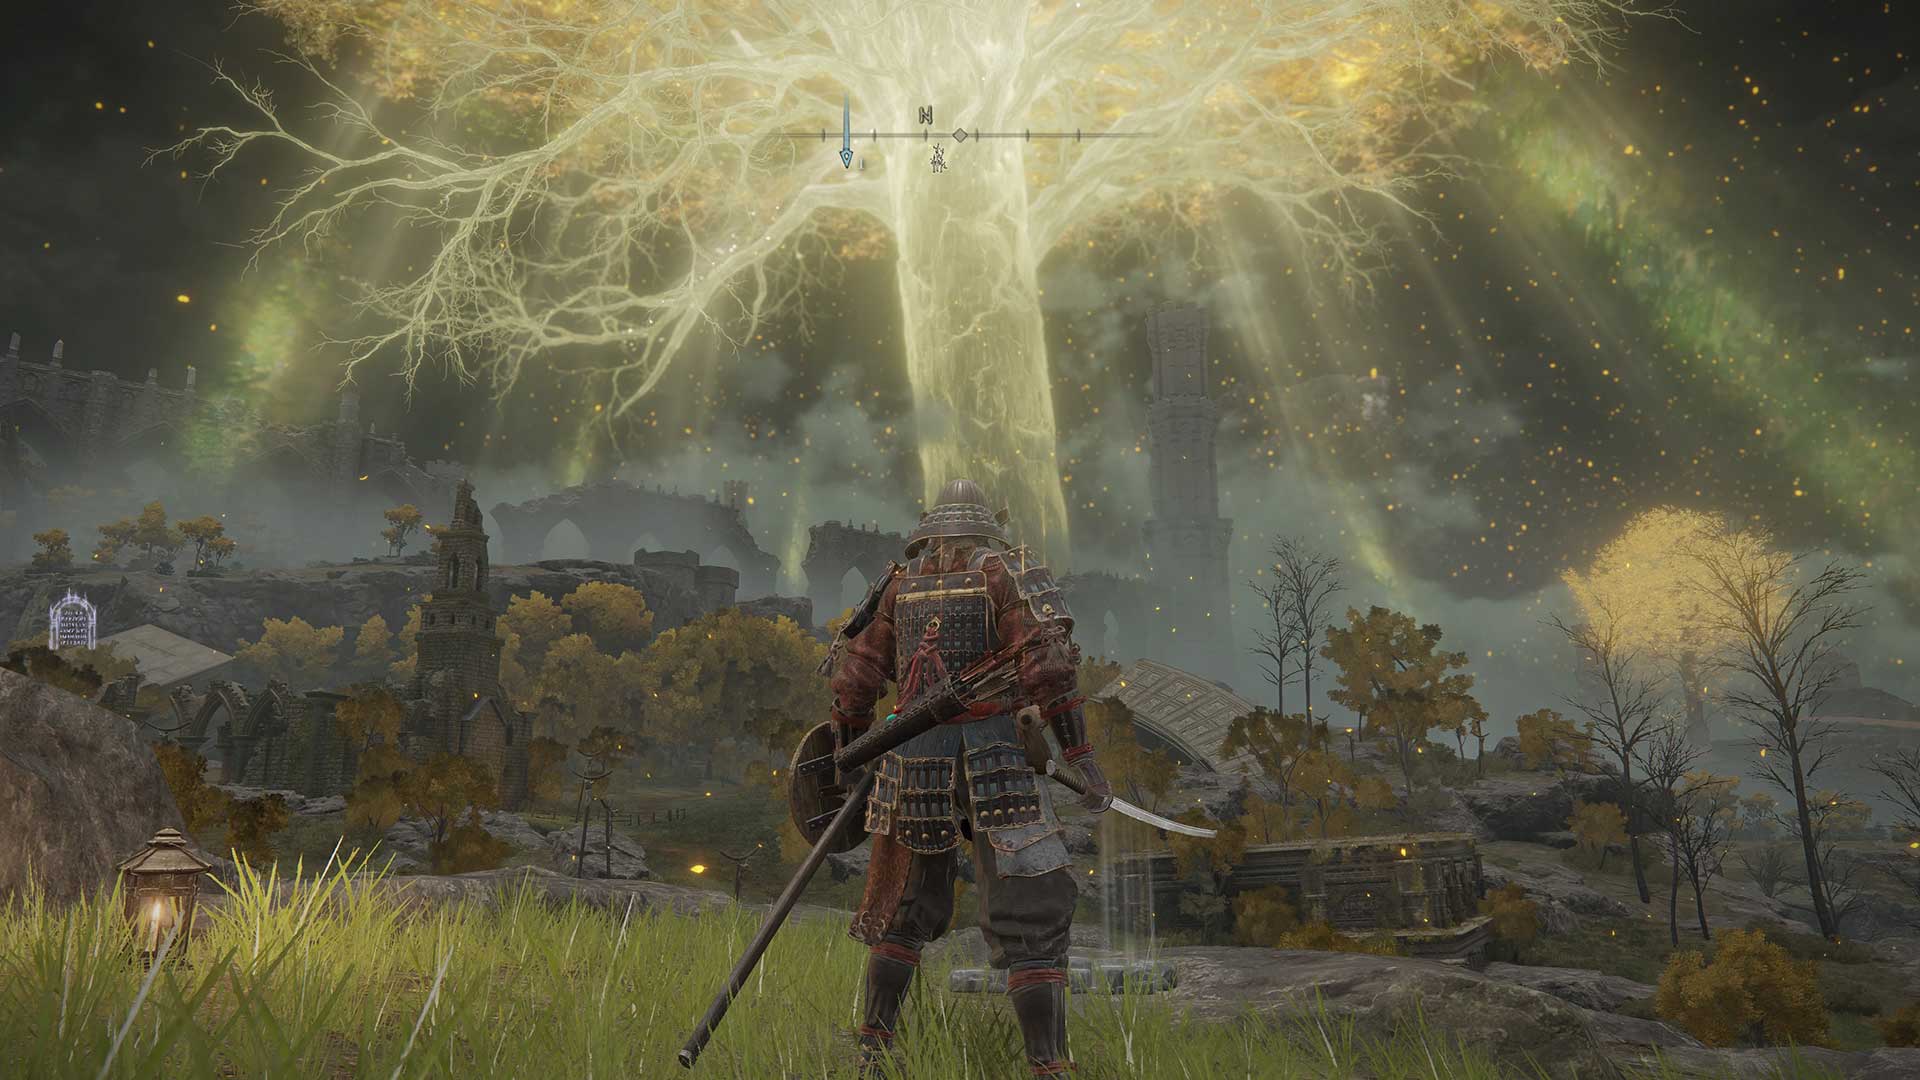 Tomb of giants moment. : r/darksouls